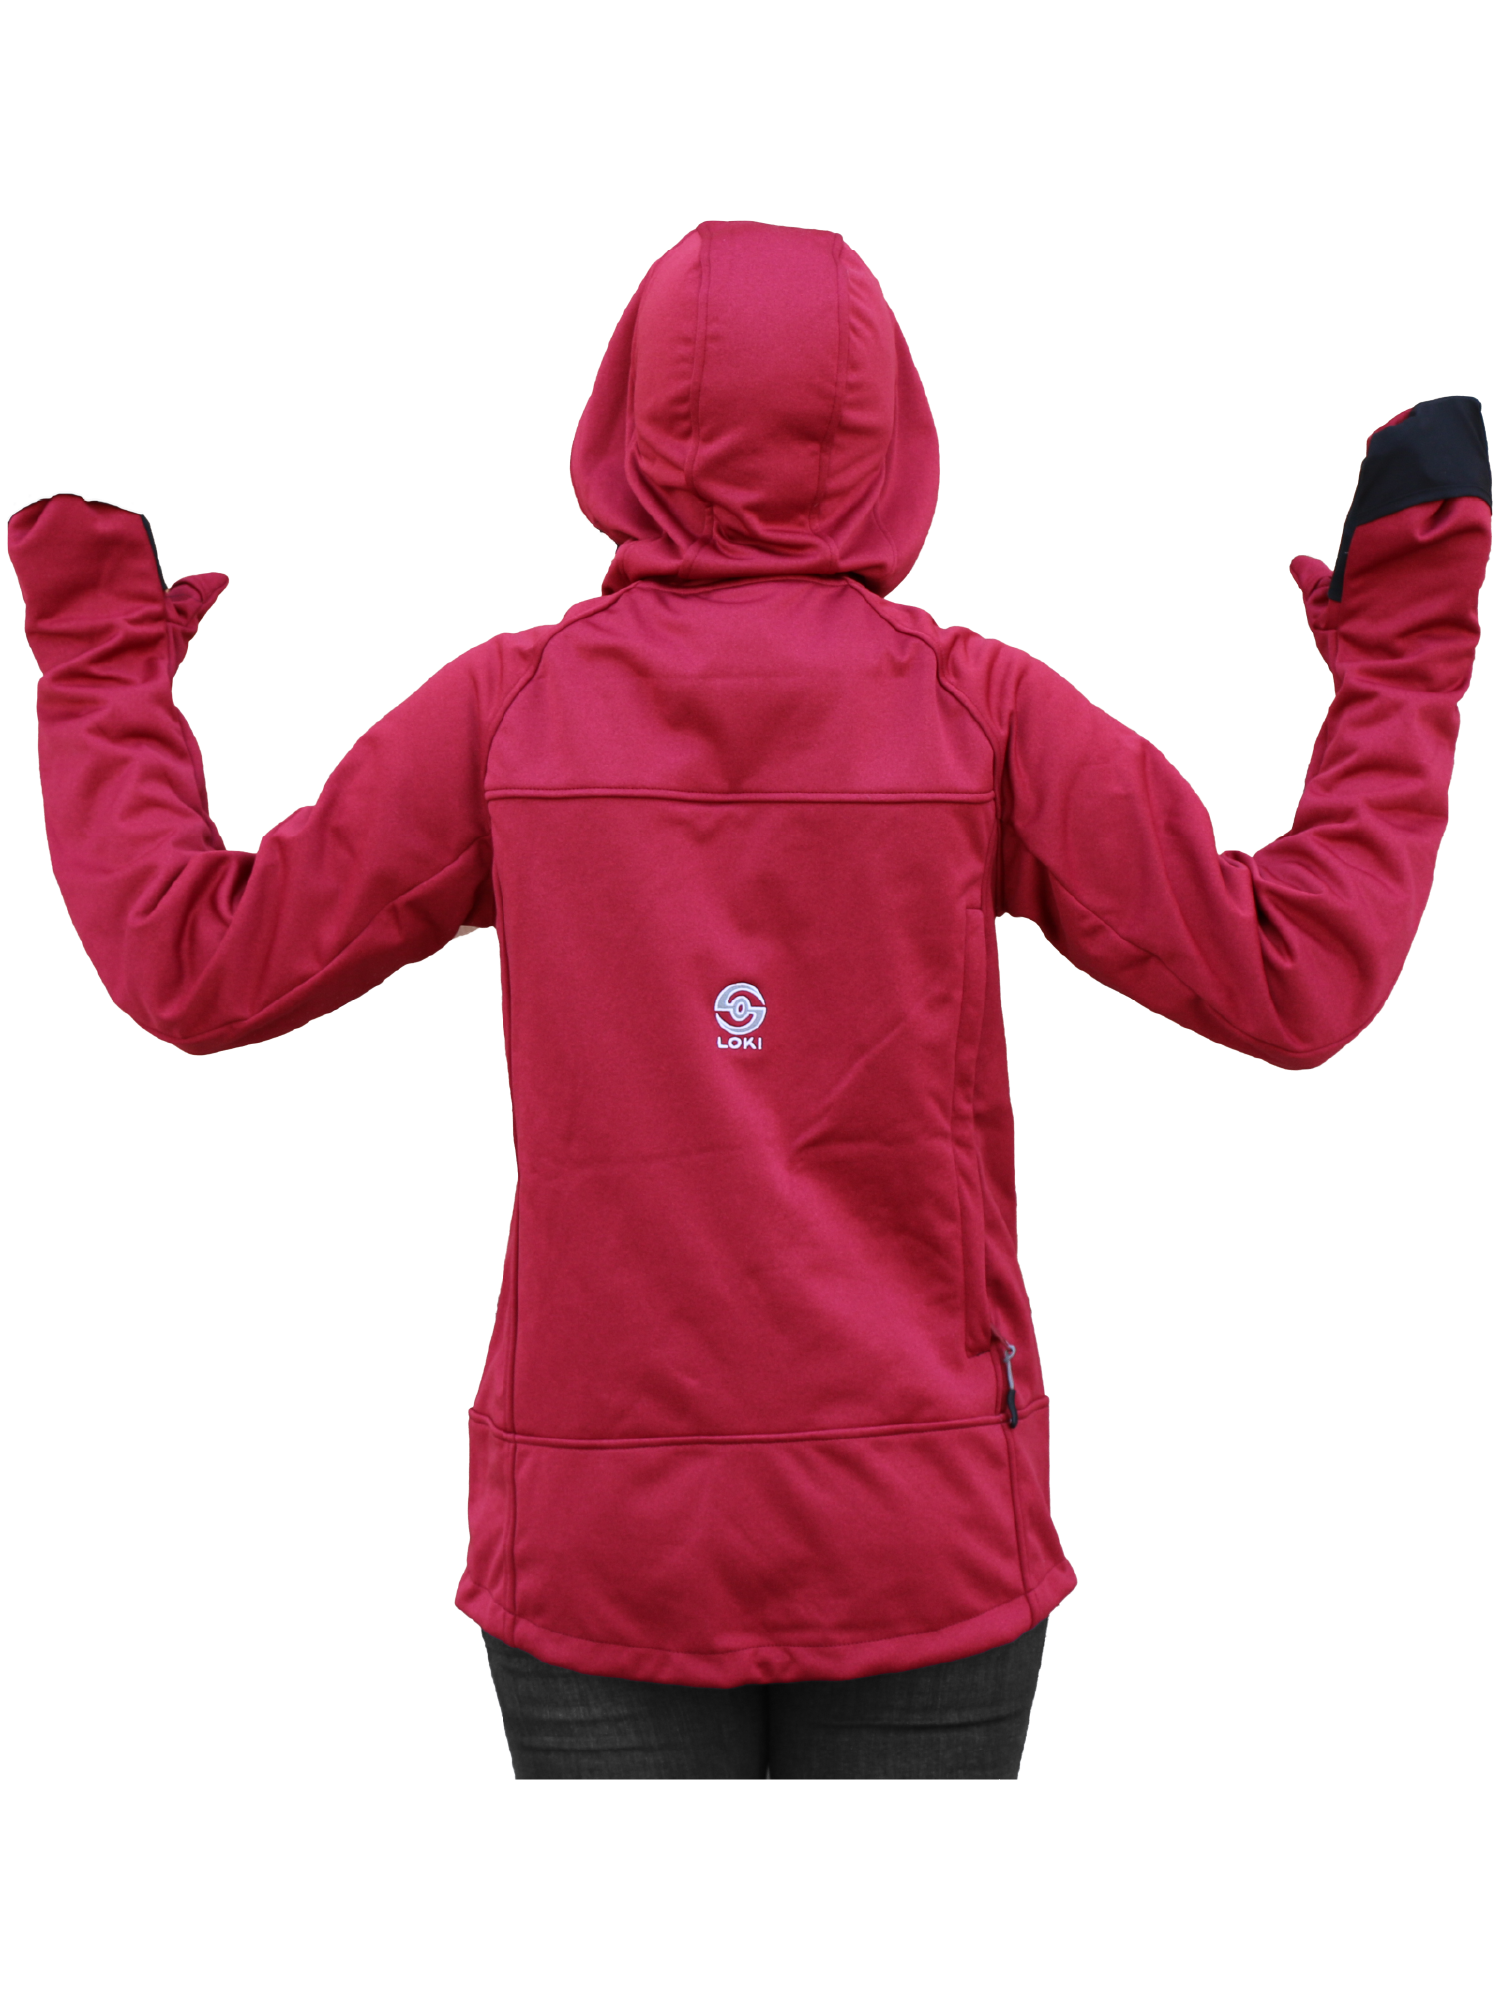 Women's Stretch Jacket - Racing Red Back